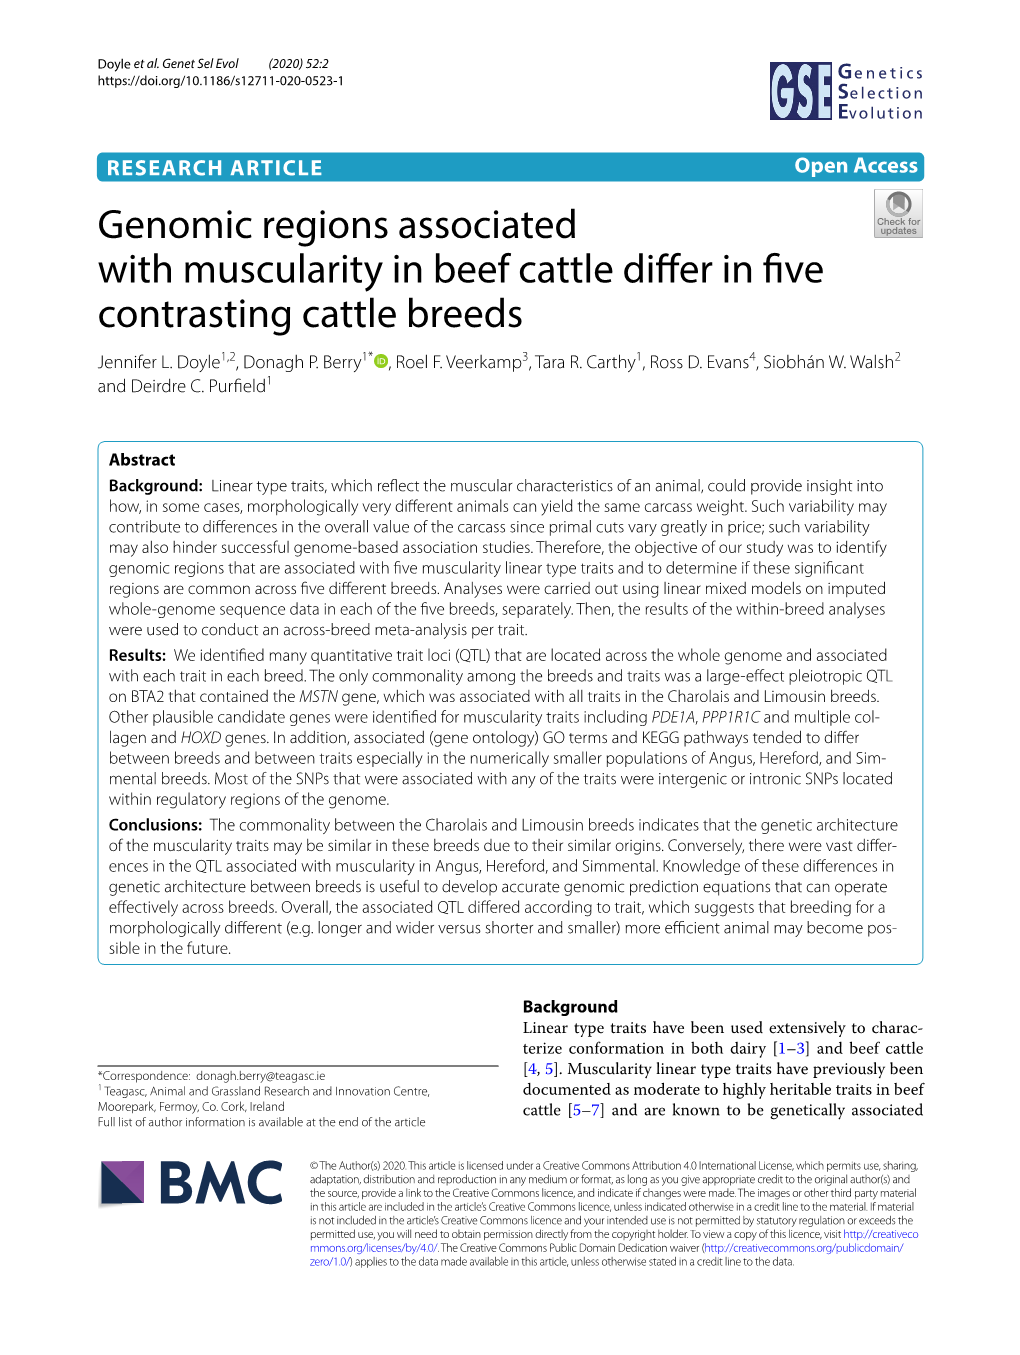 Genomic Regions Associated with Muscularity in Beef Cattle Differ In